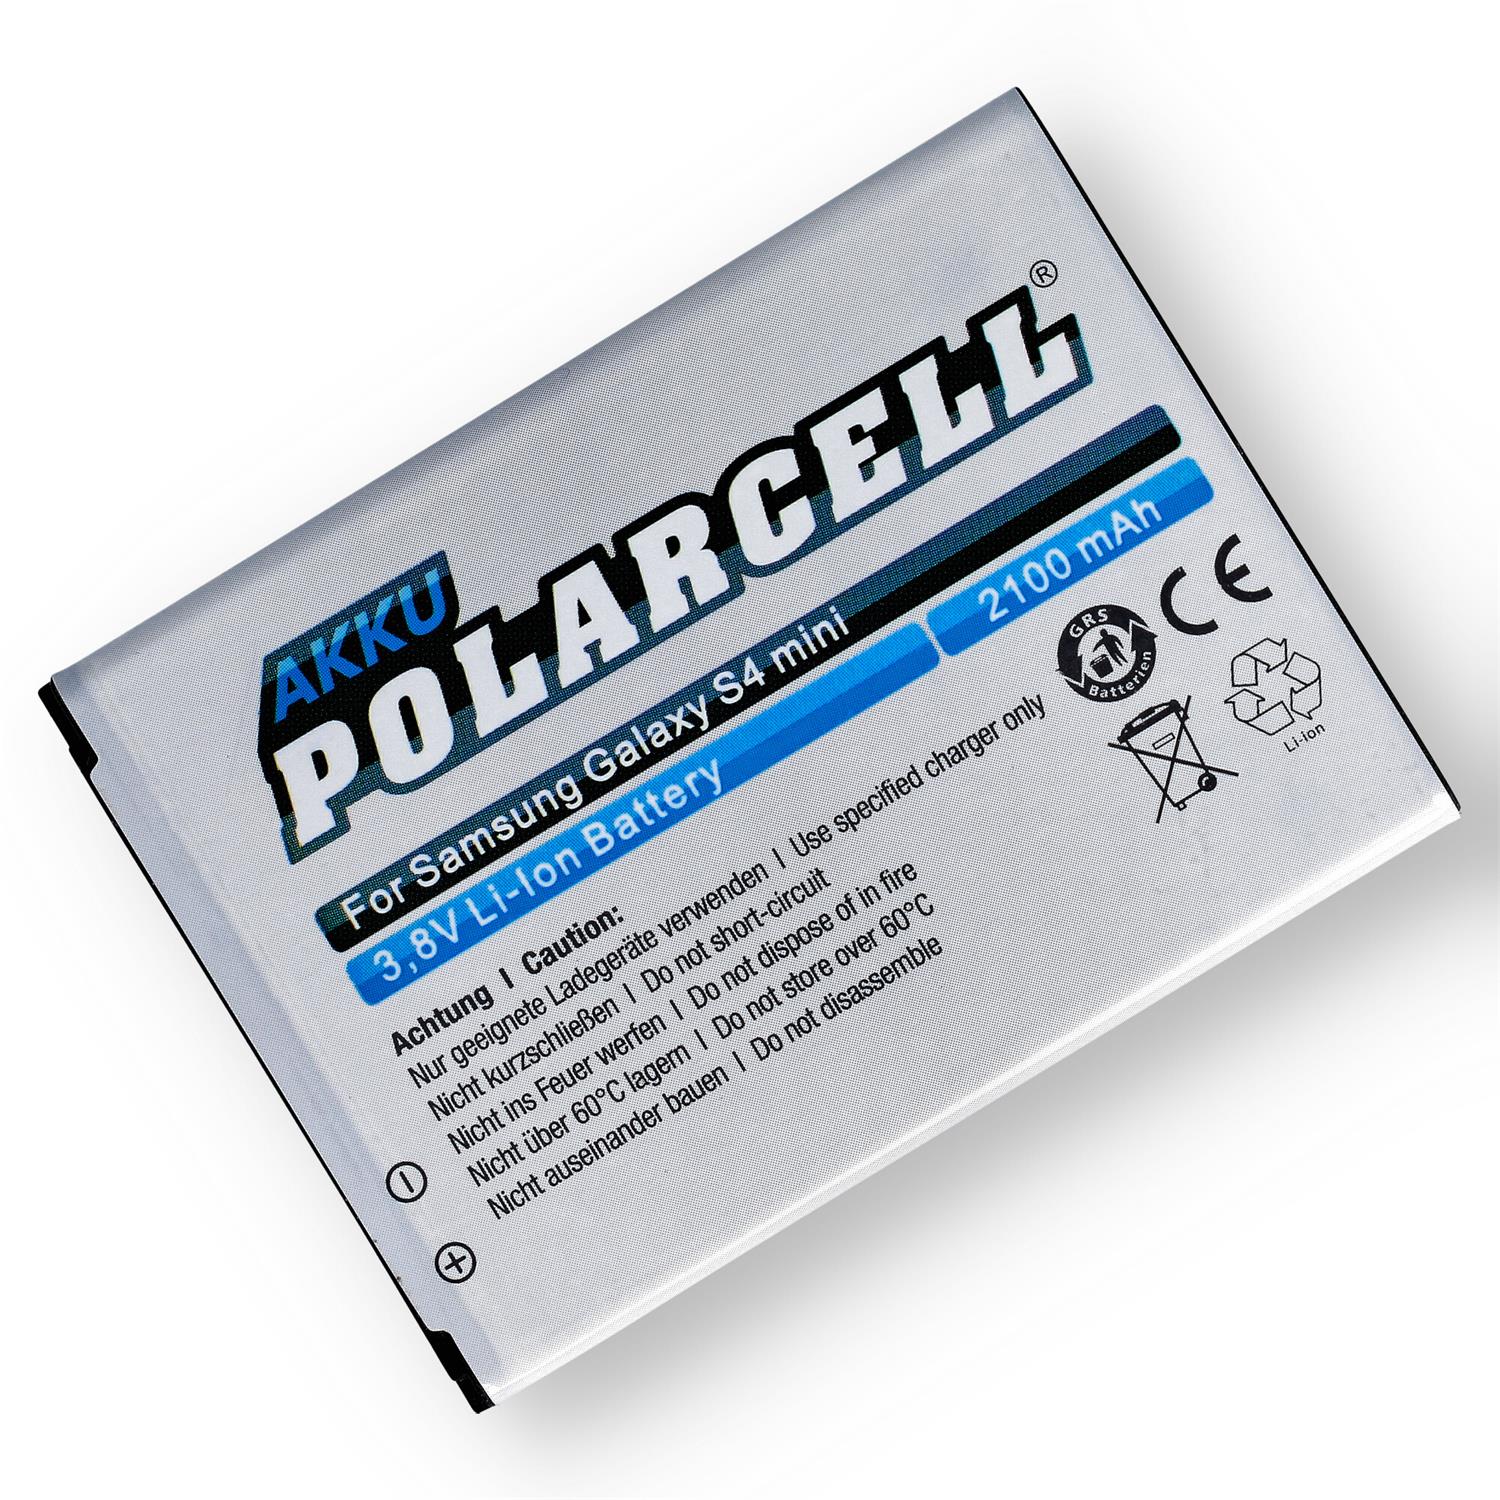 PolarCell Battery for Samsung Galaxy S4 mini GT-i9190 - buy now!